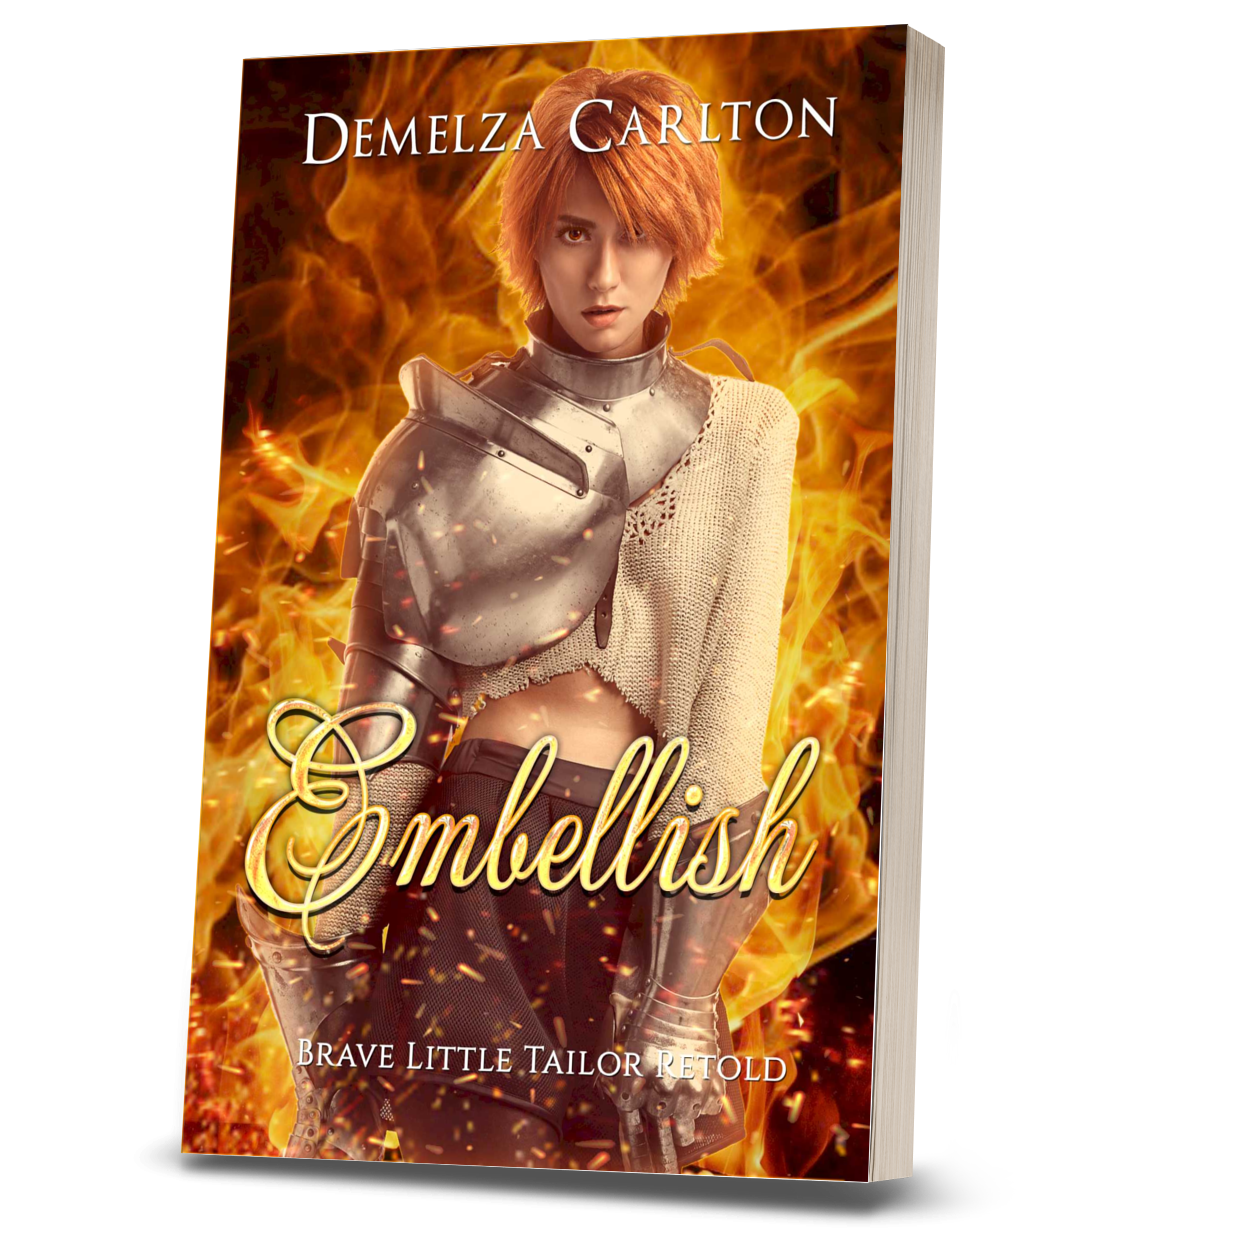 Embellish: Brave LIttle Tailor Retold (Book 7 in the Romance a Medieval Fairytale series) PAPERBACK